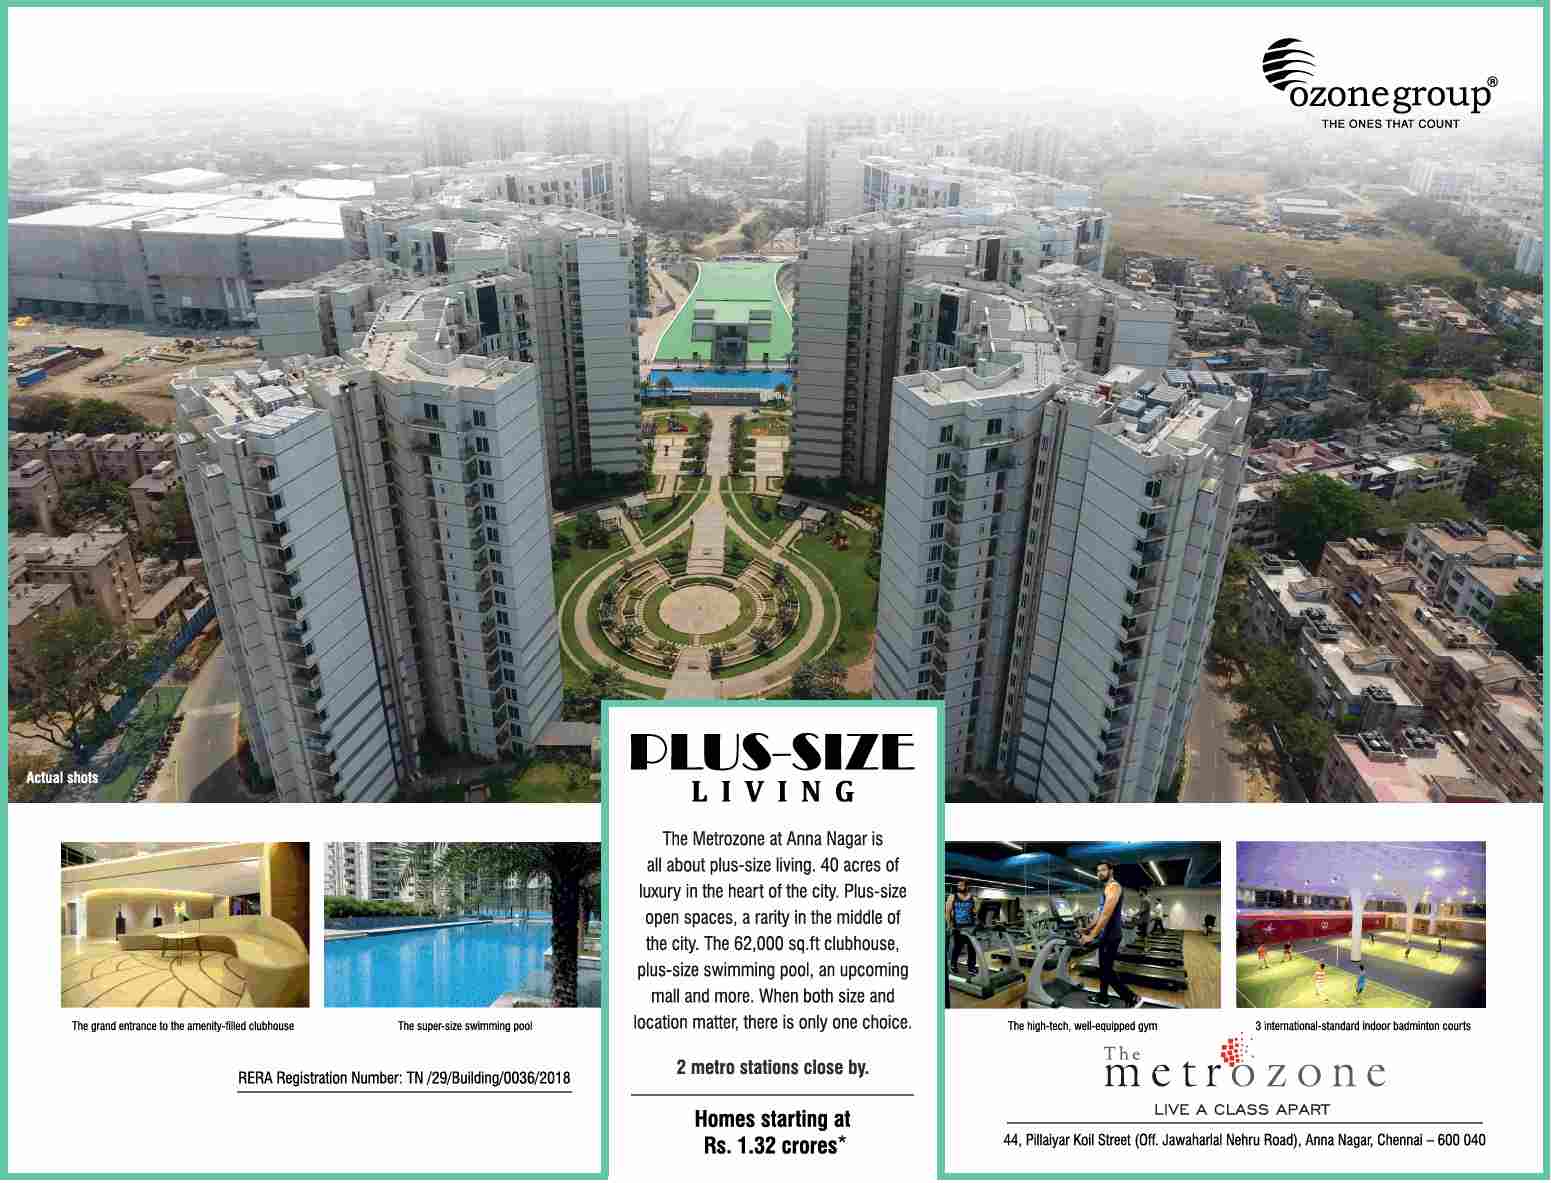 Live plus-size life in the middle of the city at Ozone The Metrozone in Chennai